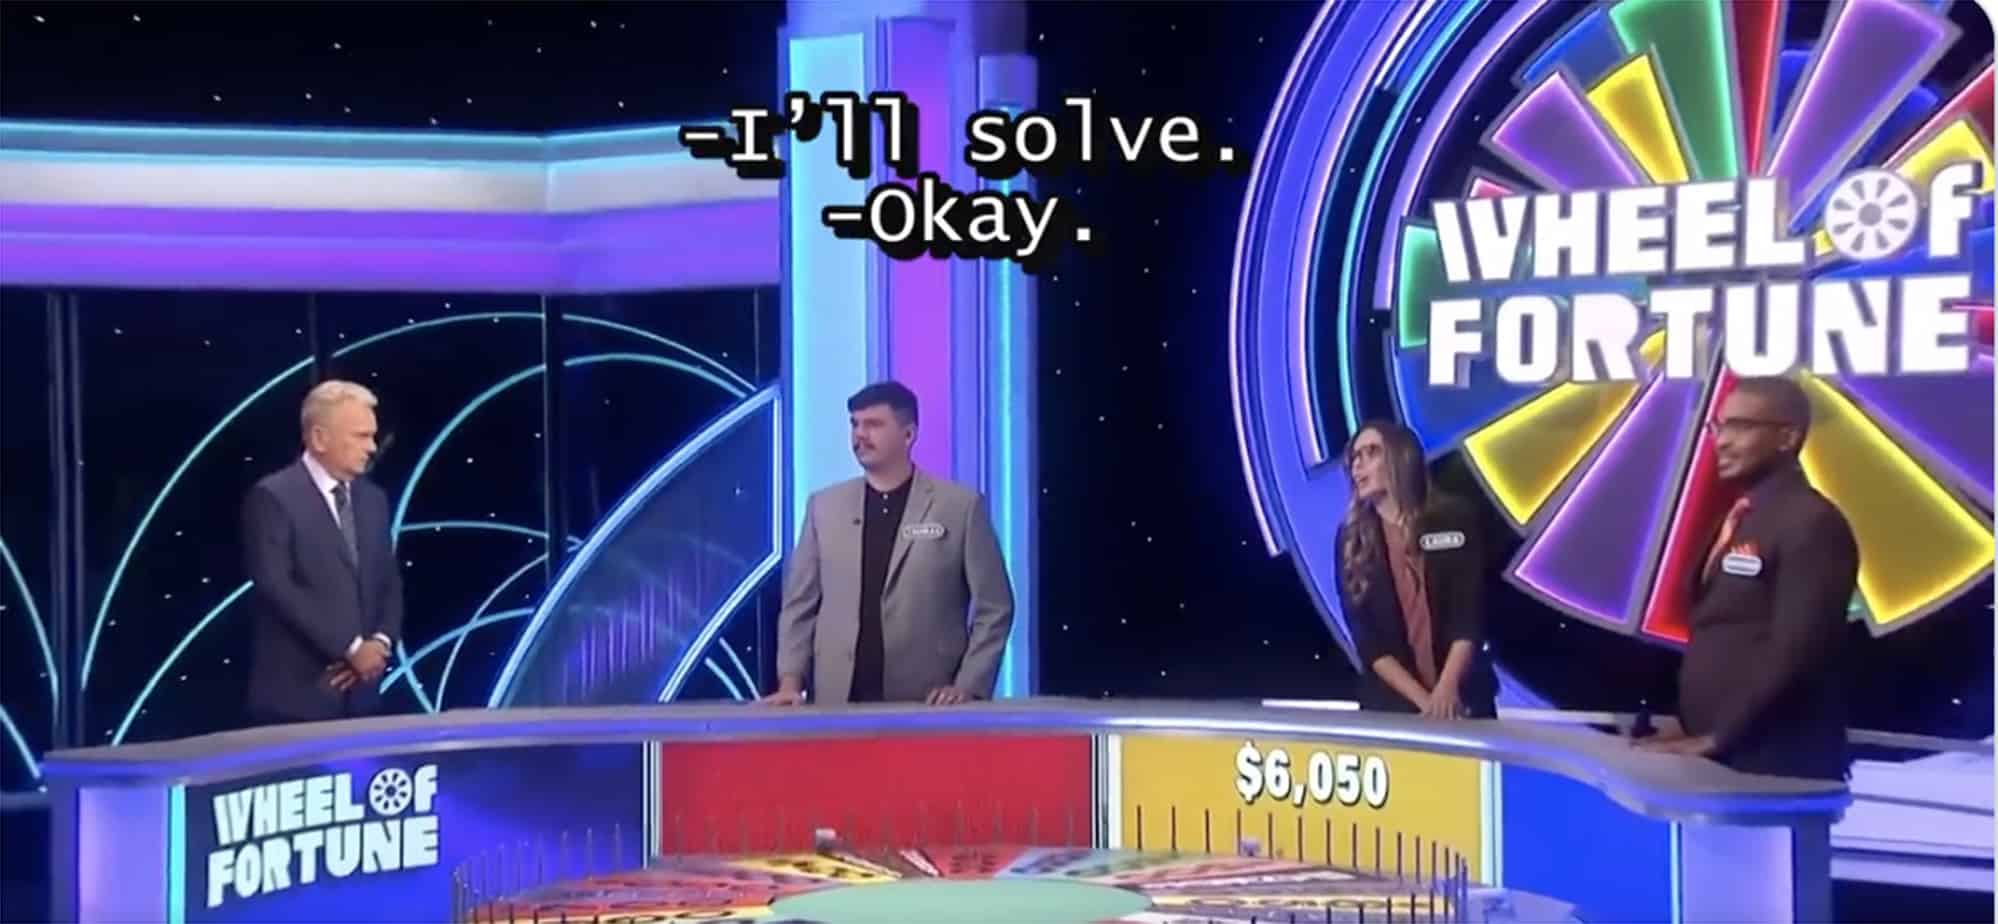 A Wheel of Fortune episode